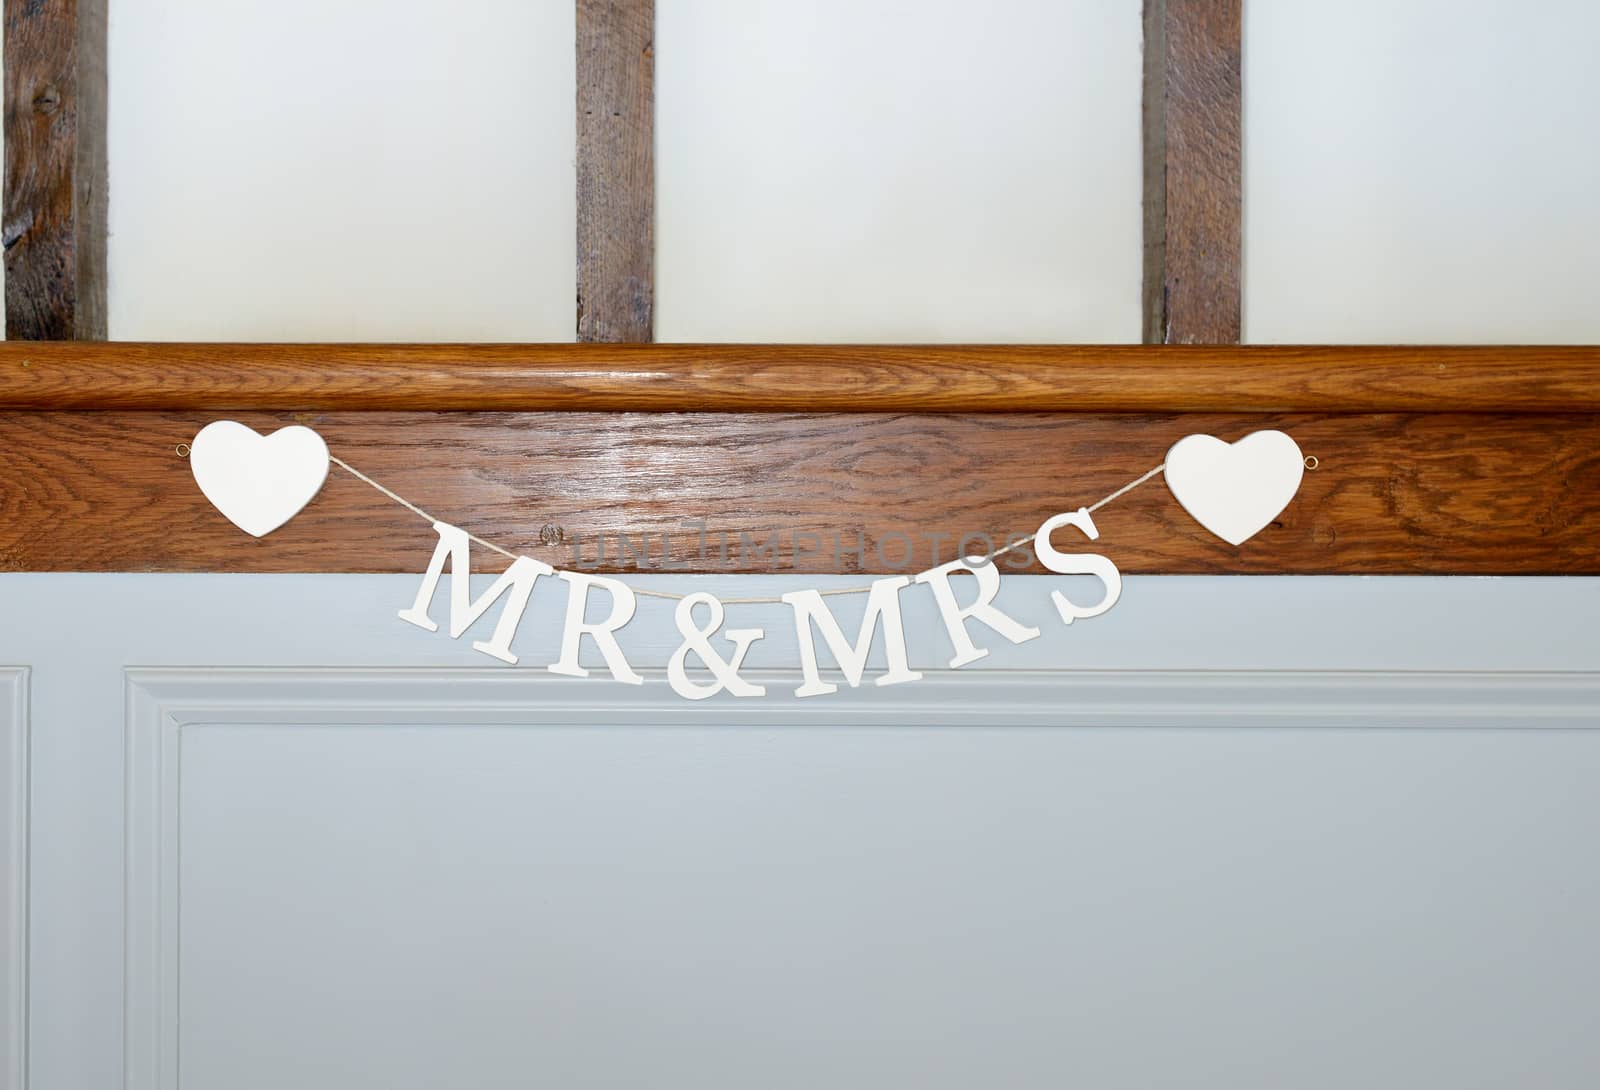 Mr & Mrs by kmwphotography